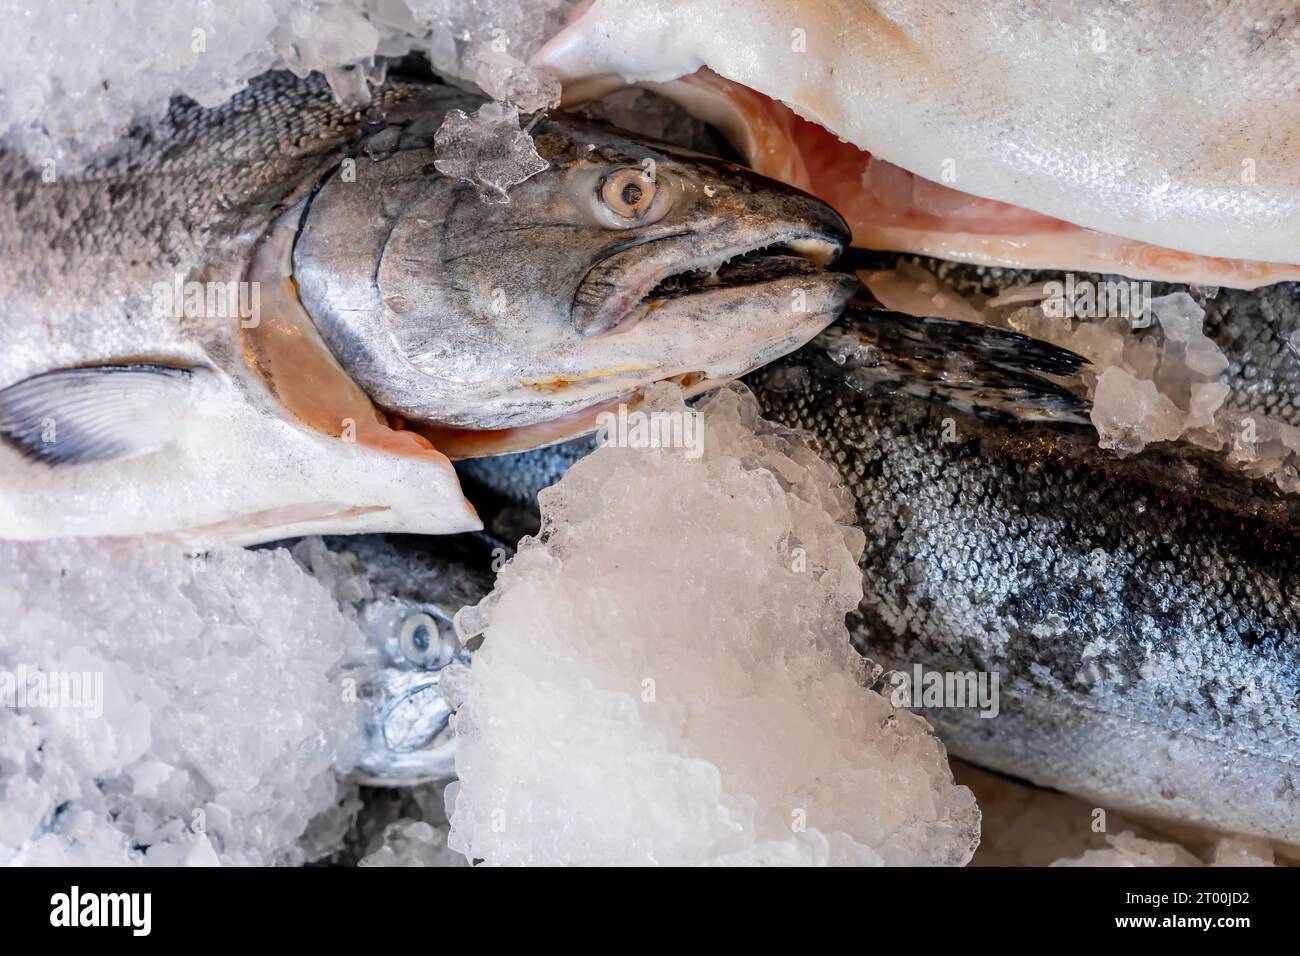 Fresh Seafood On Ice At An Open Air Market Stock Photo